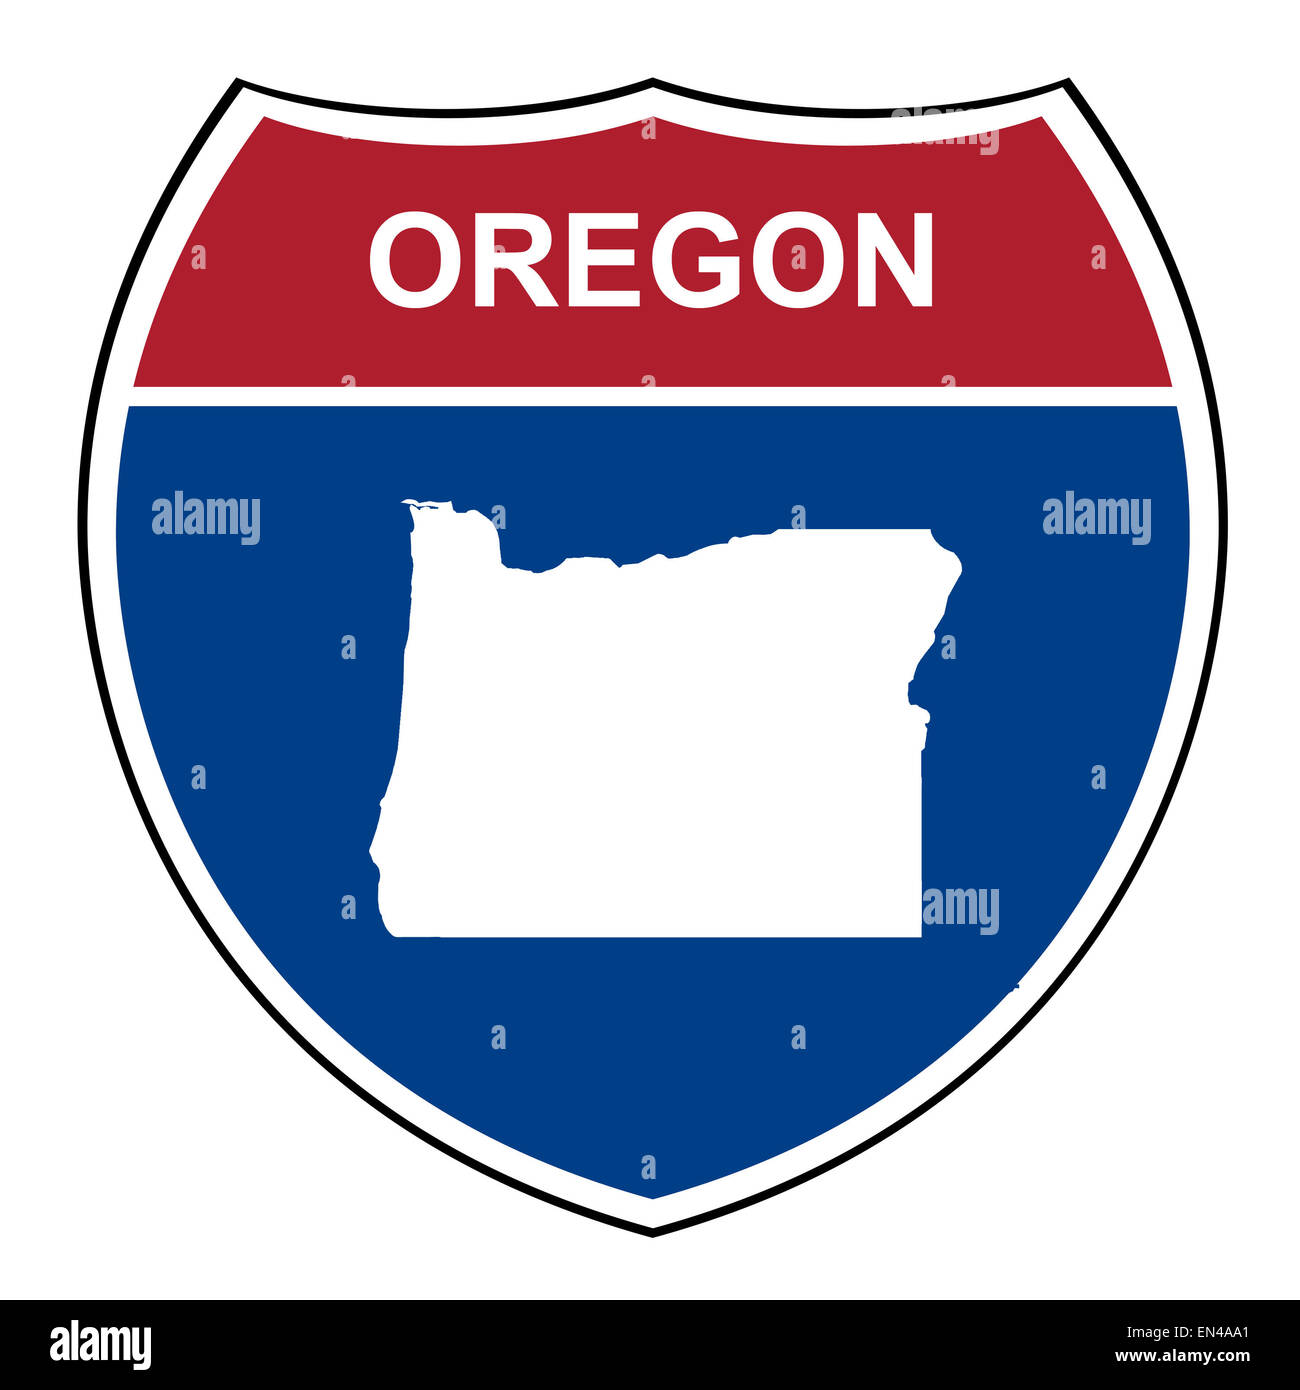 Oregon American interstate highway road shield isolated on a white background. Stock Photo